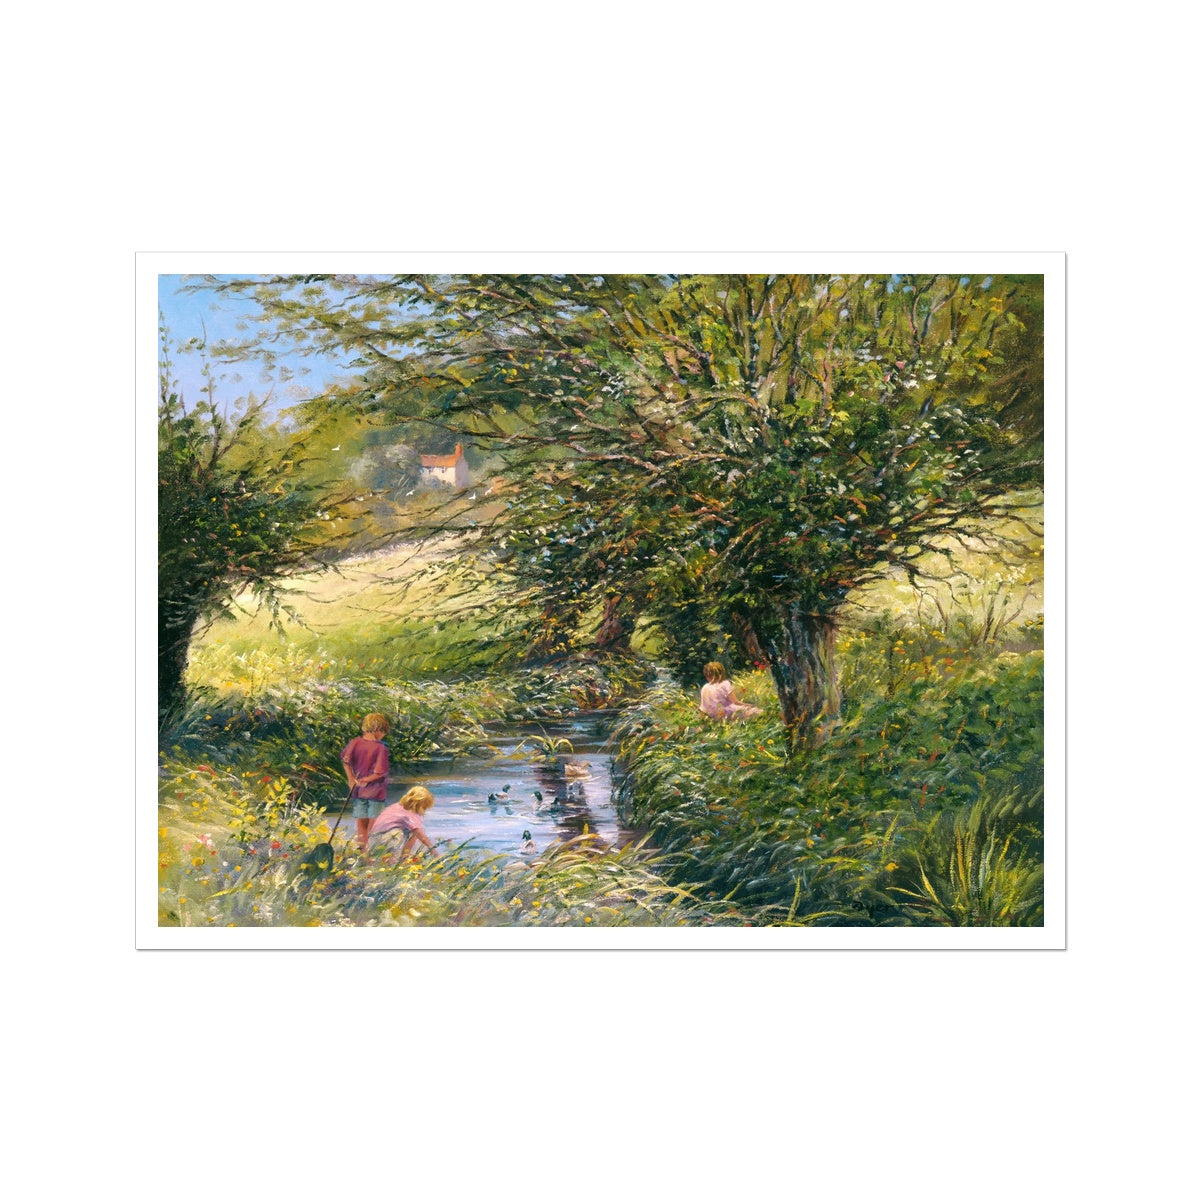 Ted Dyer Fine Art Print. Open Edition Cornish Art Print. 'Fishing in the Duck Pond'. Cornwall Art Gallery